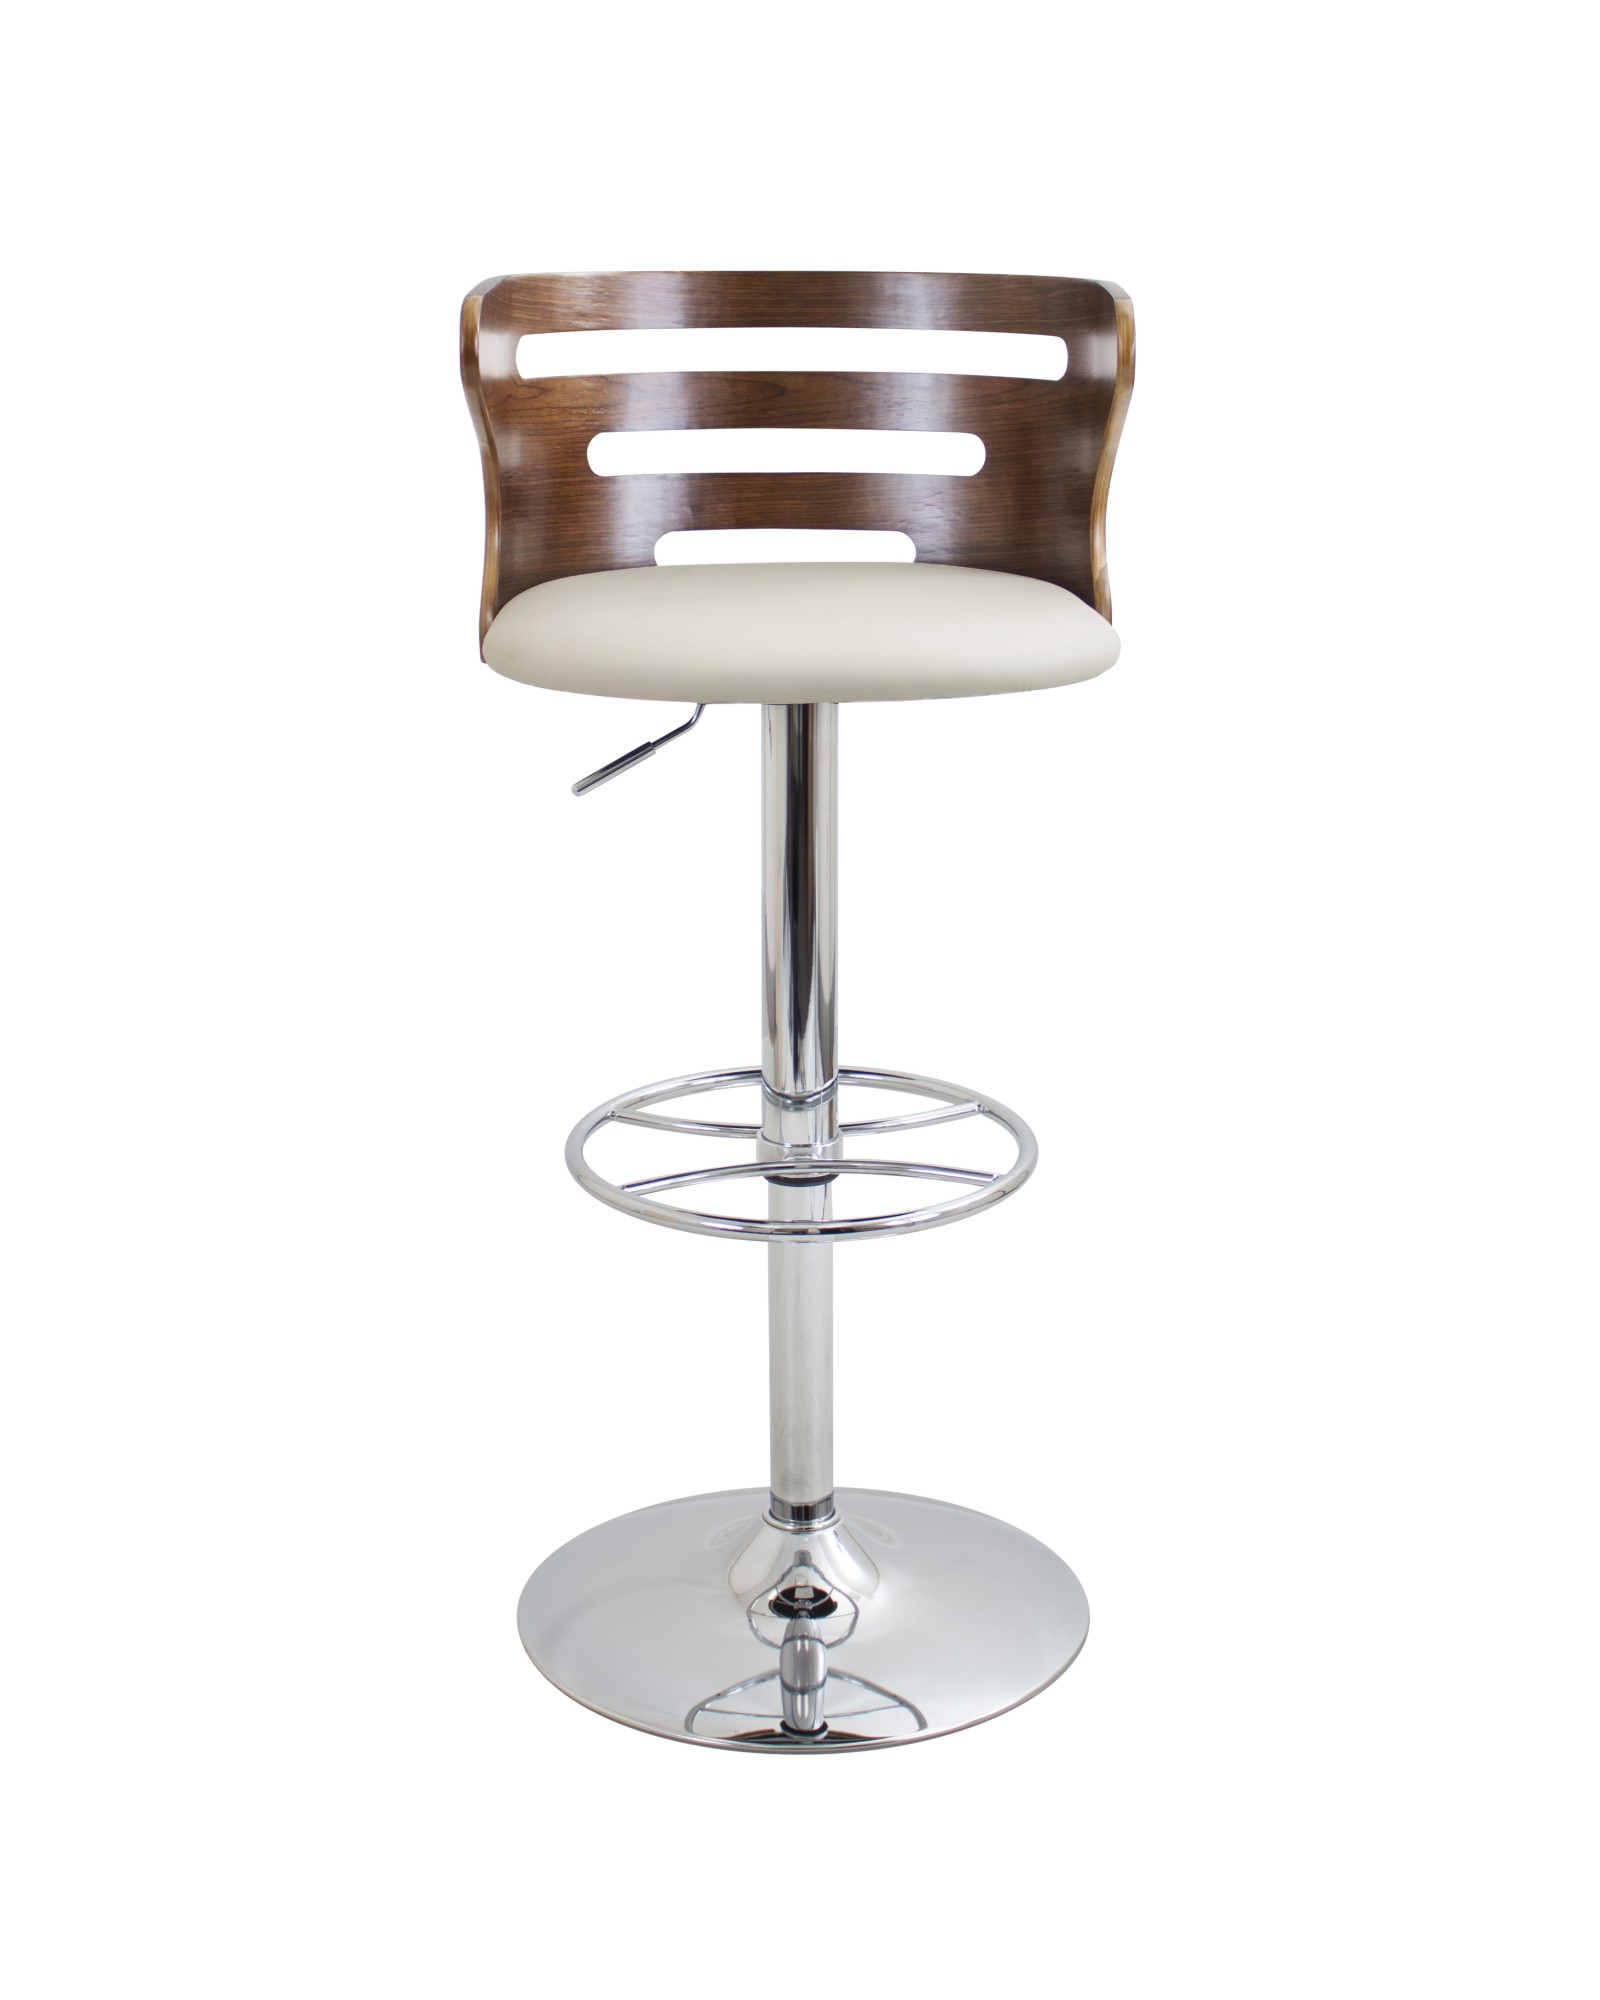 Cosi Mid-Century Modern Adjustable Barstool with Swivel in Walnut and Cream Faux Leather